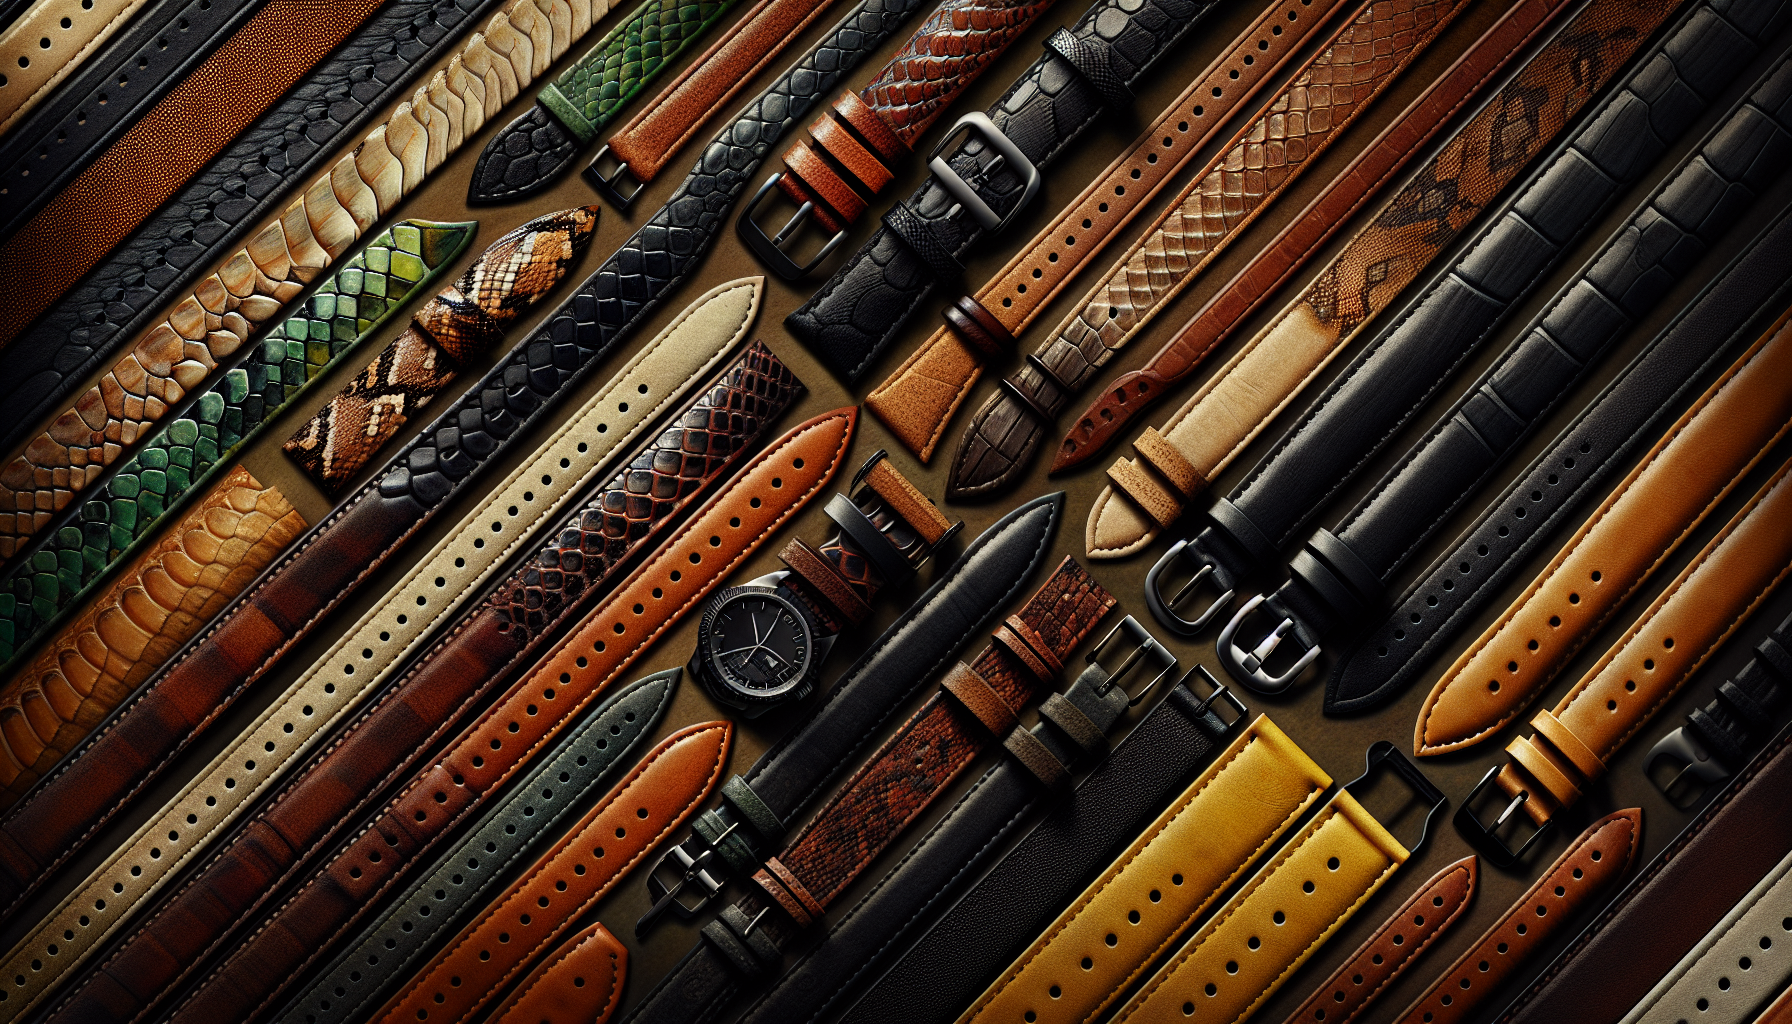 Diverse textures available in watch straps